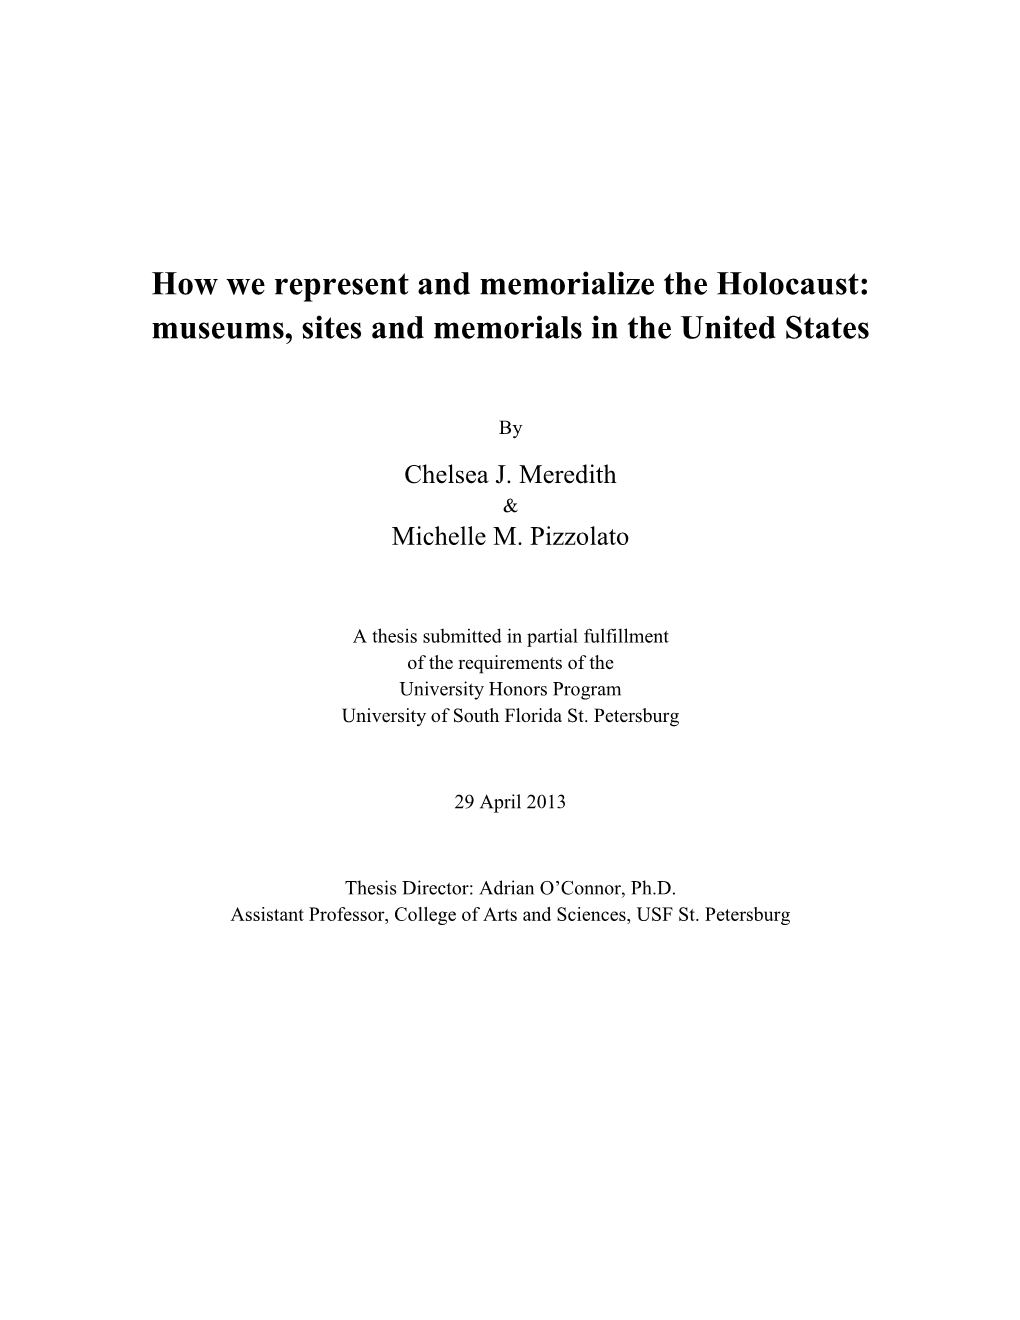 How We Represent and Memorialize the Holocaust: Museums, Sites and Memorials in the United States